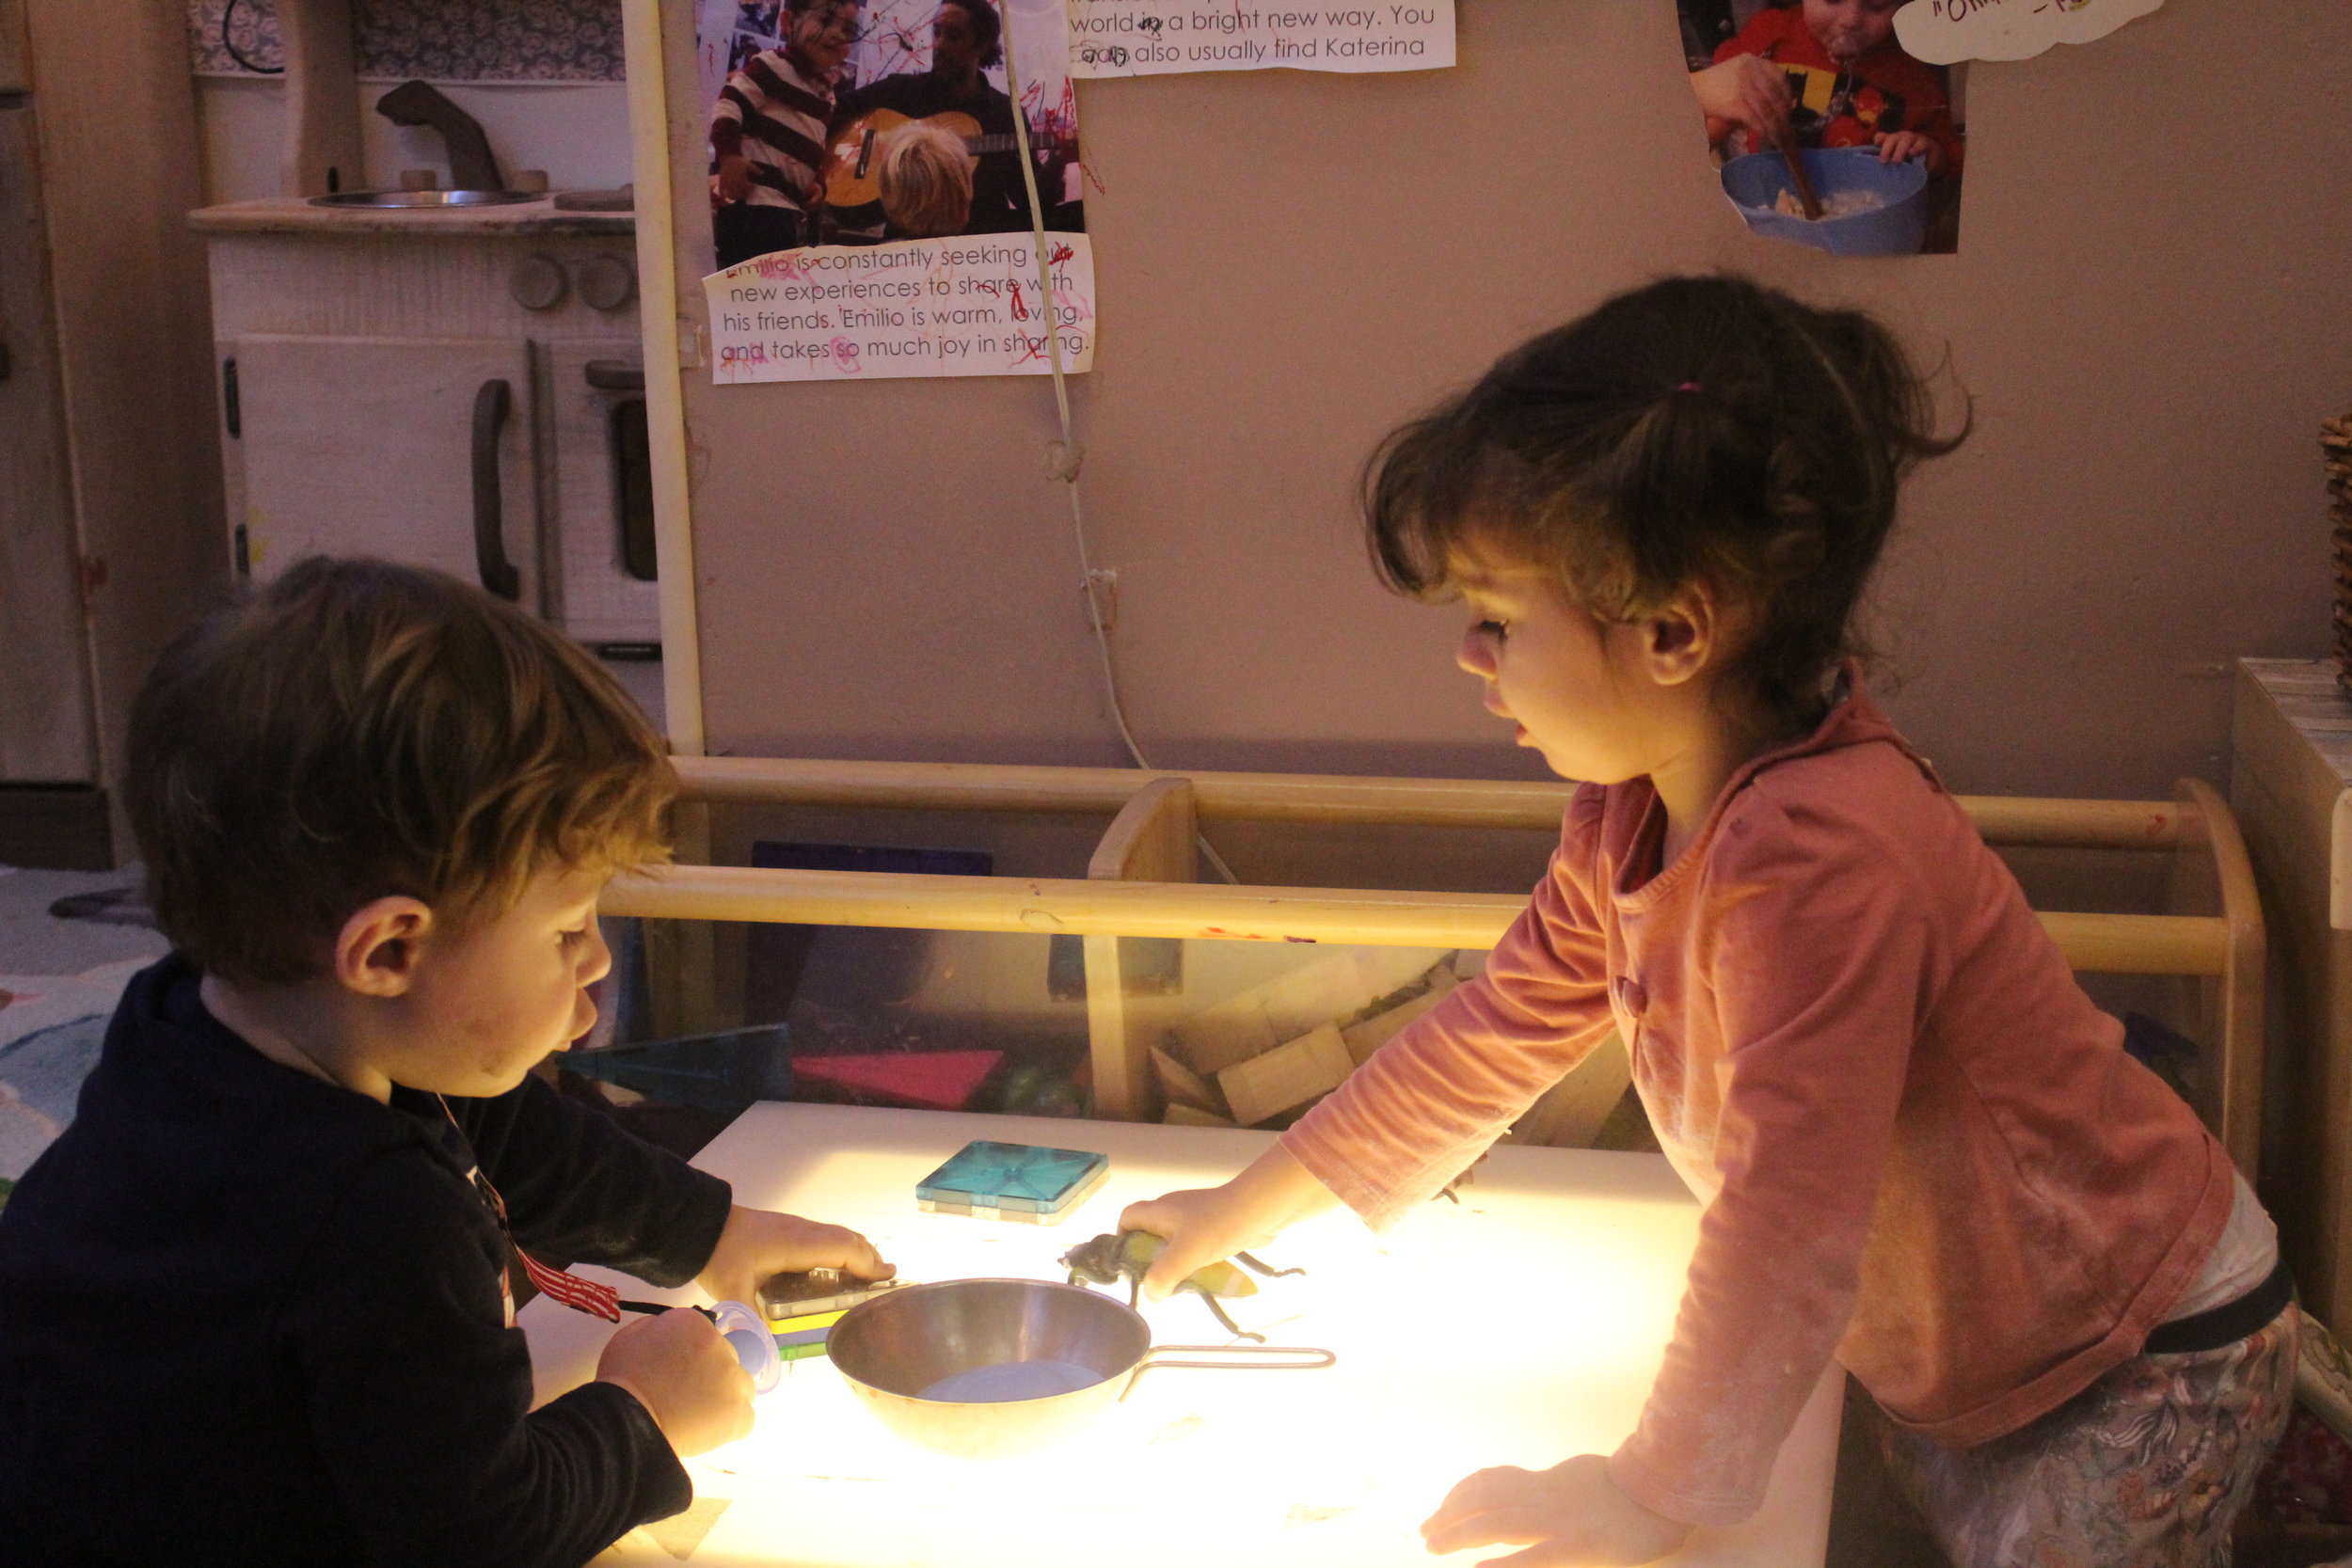  Making connections and fostering friendships at the light table. Engaging in emerging cooperative play skills yet again, bravo Max and Nina! 